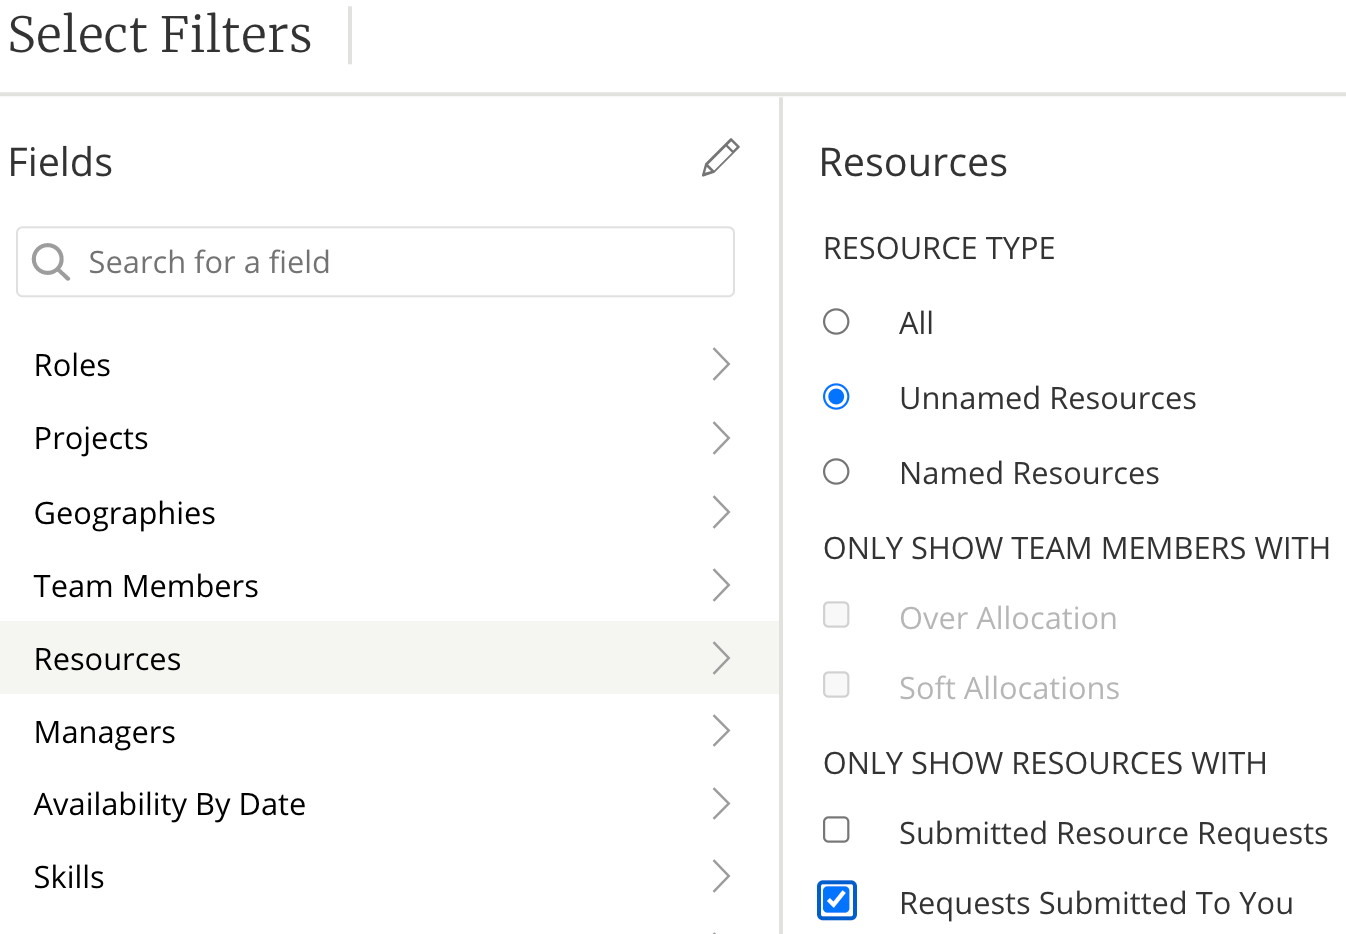 Resources_Filter_with_Unnamed_Resources_and_Requests_Submitted_To_You_selected.png